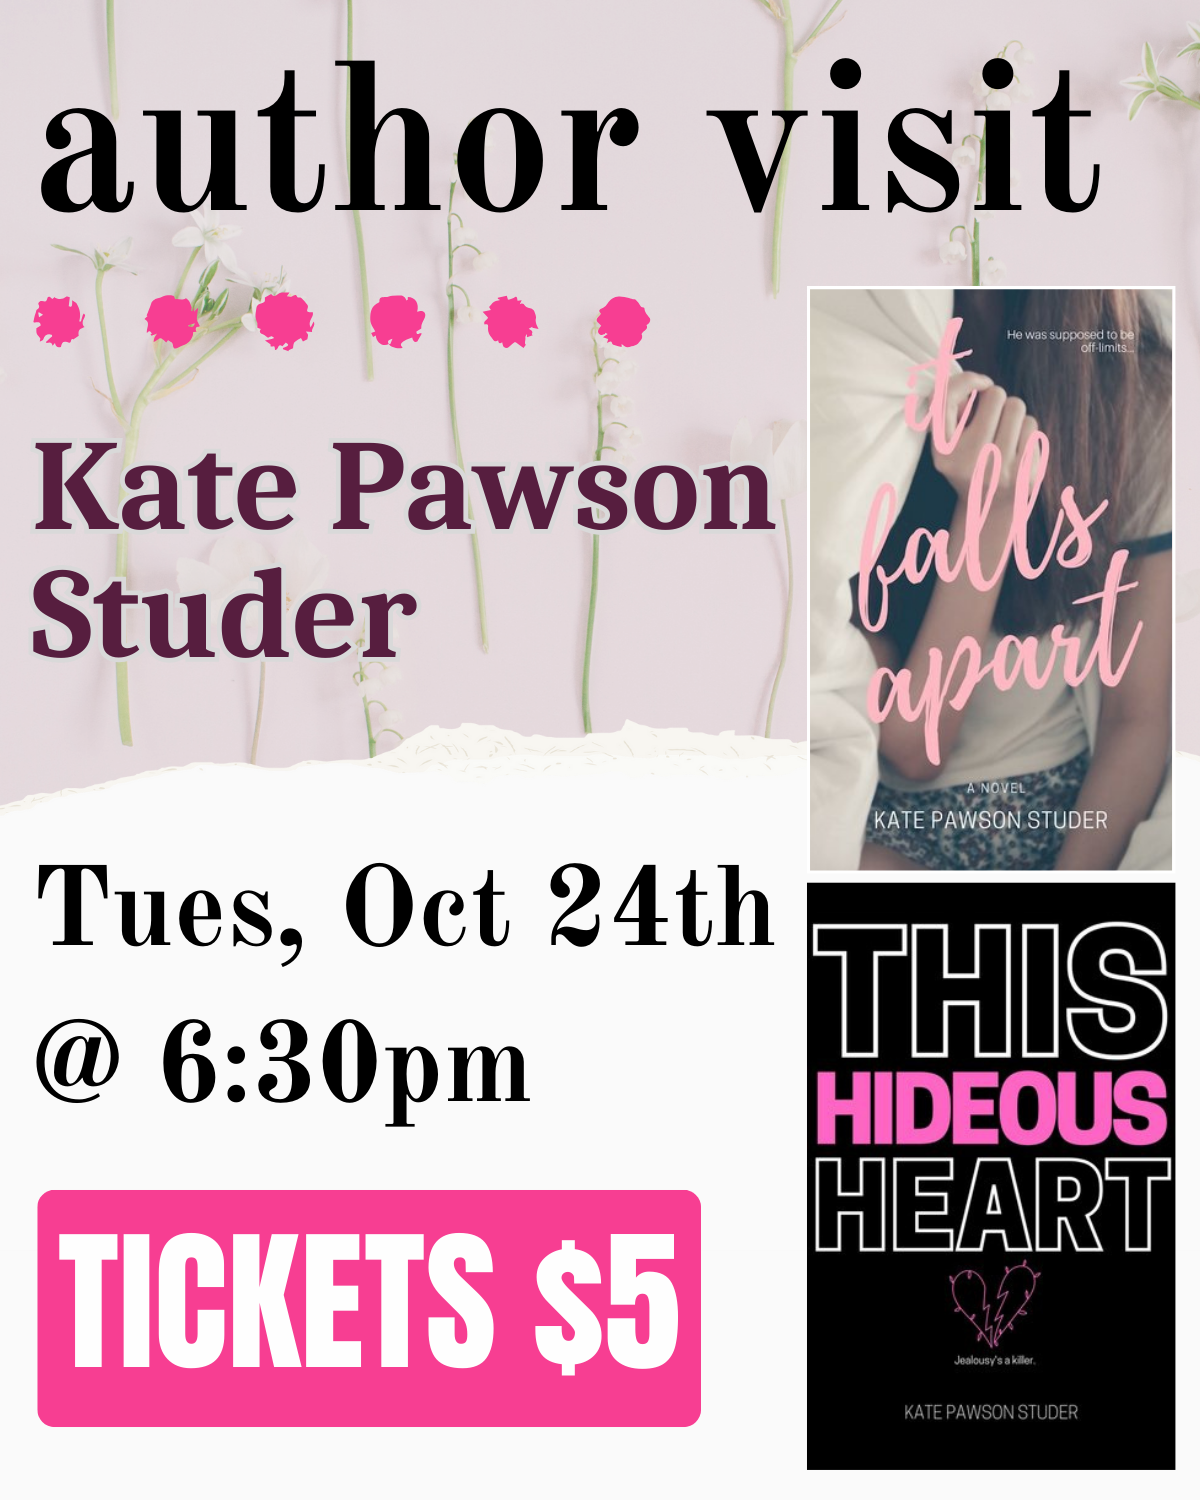 Author Visit - Kate Pawson Studer - Tuesday October 24th at 6:30pm - Tickets $5